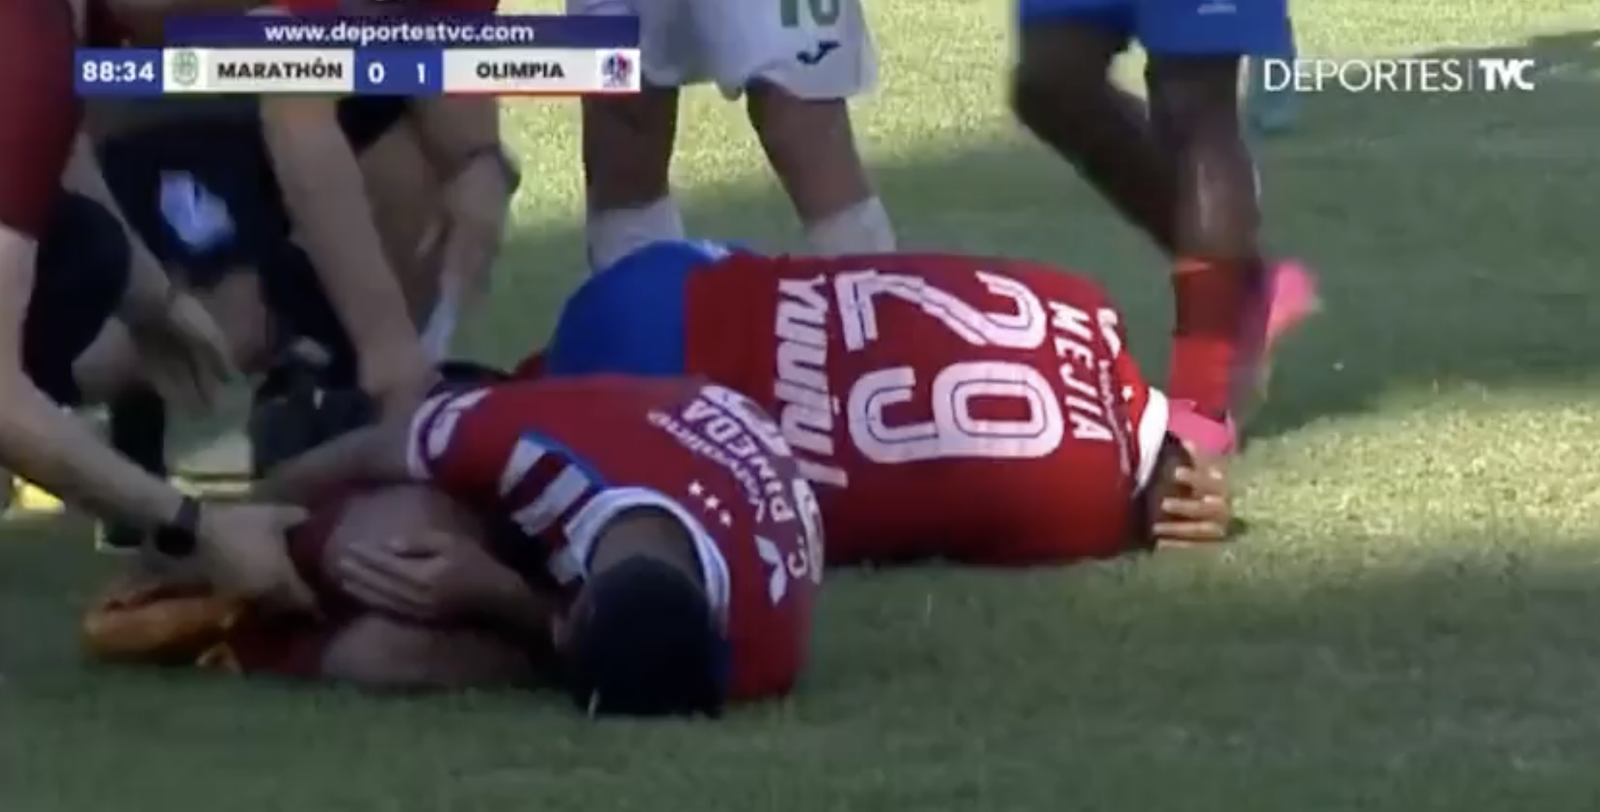 Two Olimpia players stay down after being tackled.